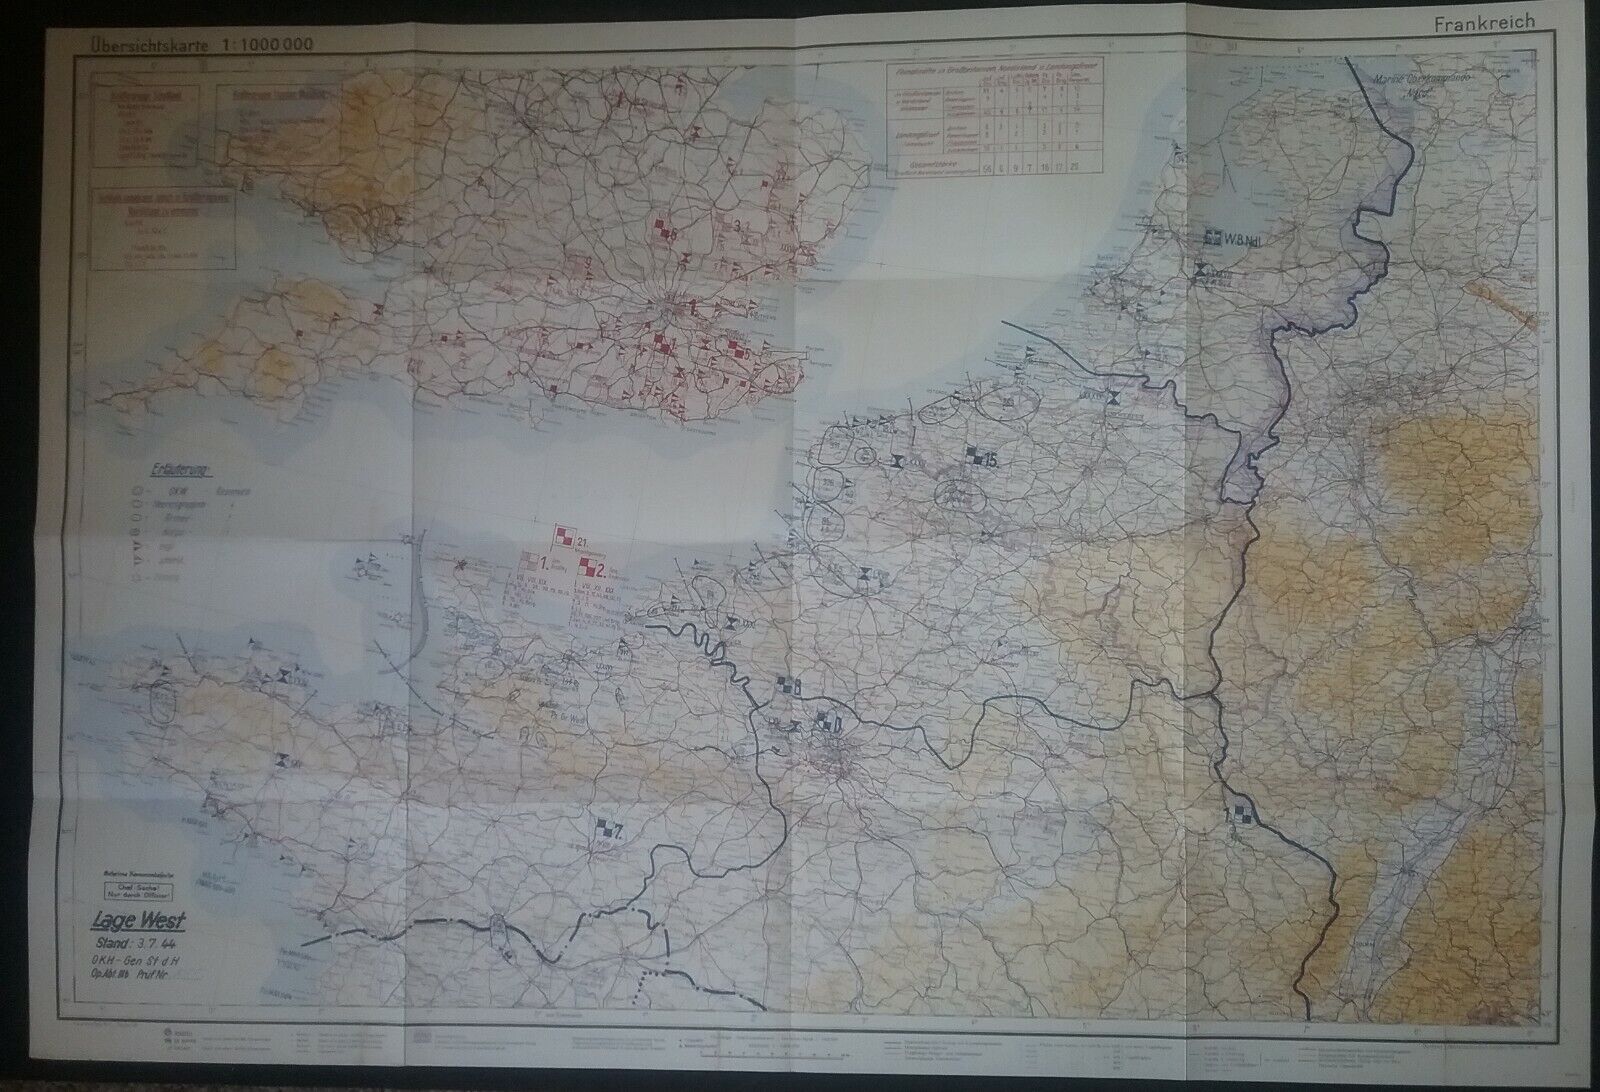 D-DAY GERMAN INTELLIGENCE MAP ISSUED ON 3RD JULY 1944 WWII DOCUMENTS 